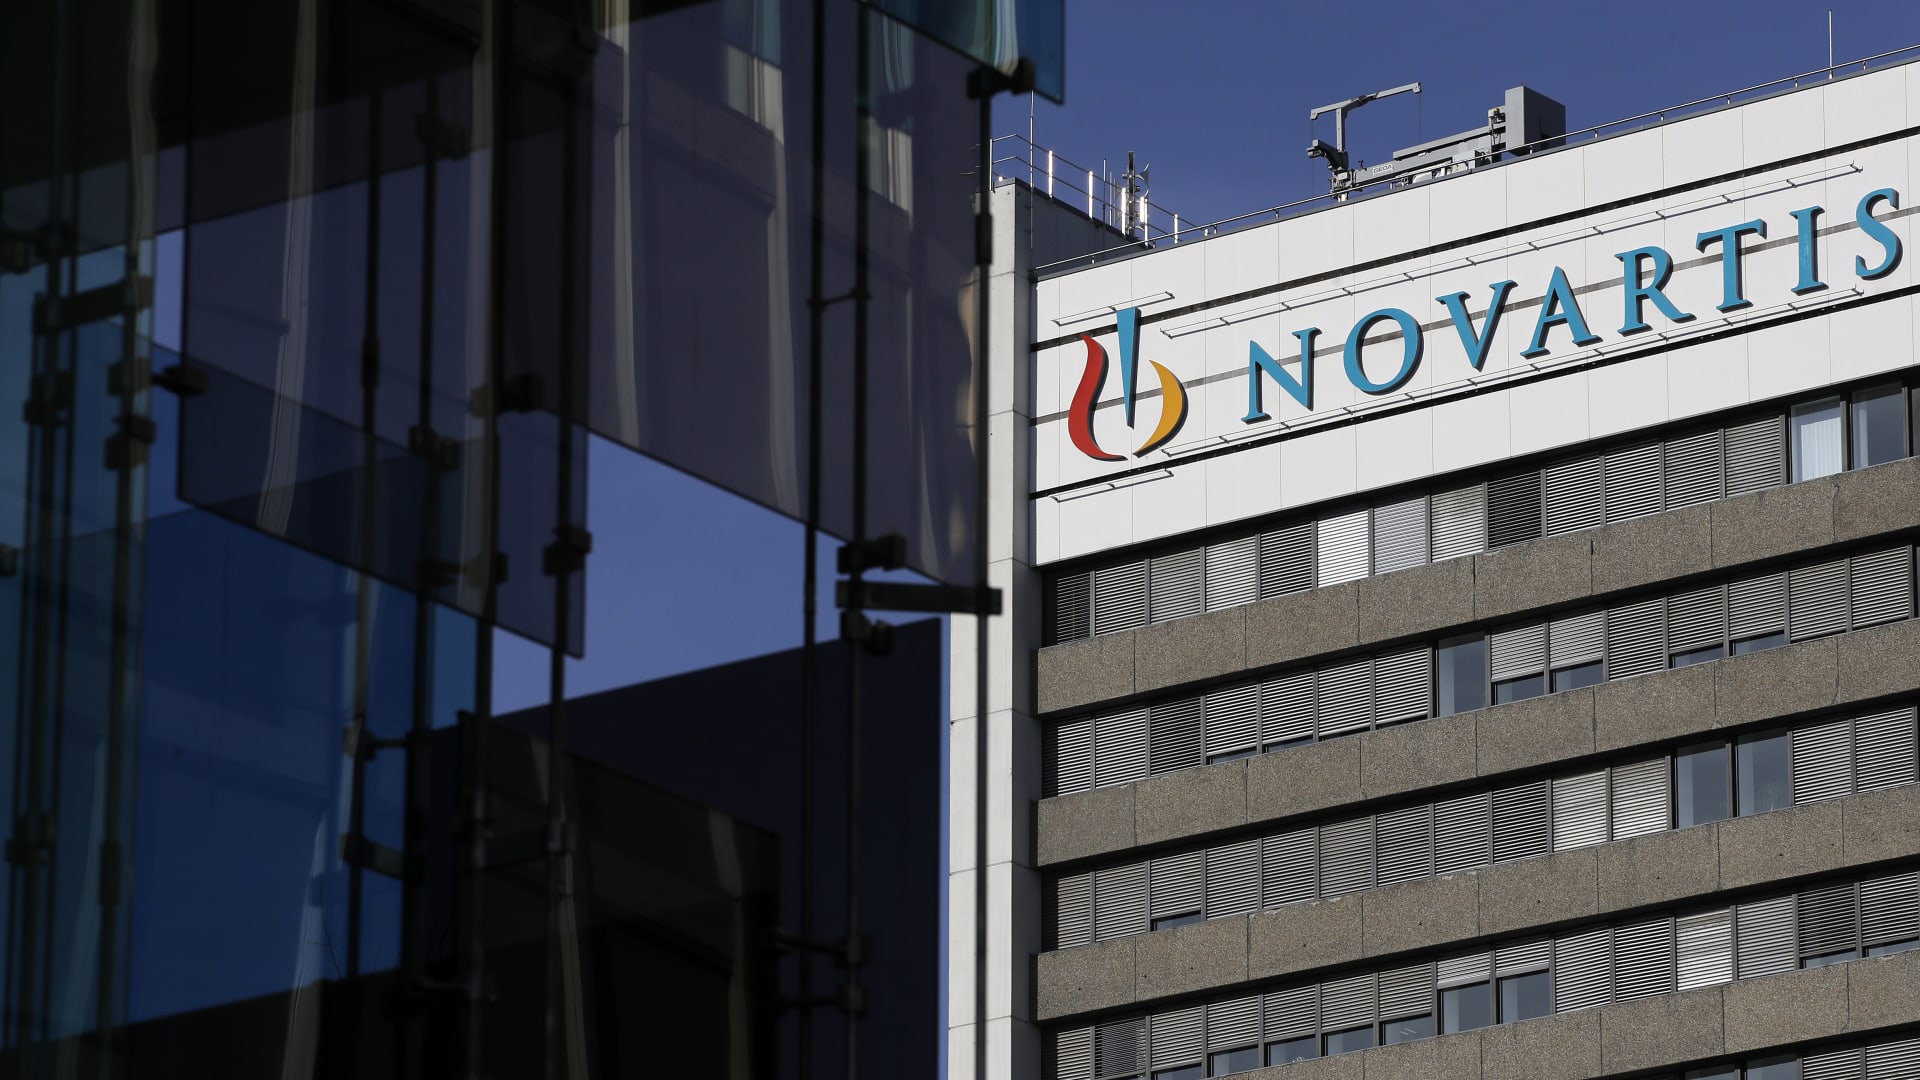 Novartis said in August that it plans to spin off its generics unit Sandoz to sharpen its focus on its patented prescription medicines.